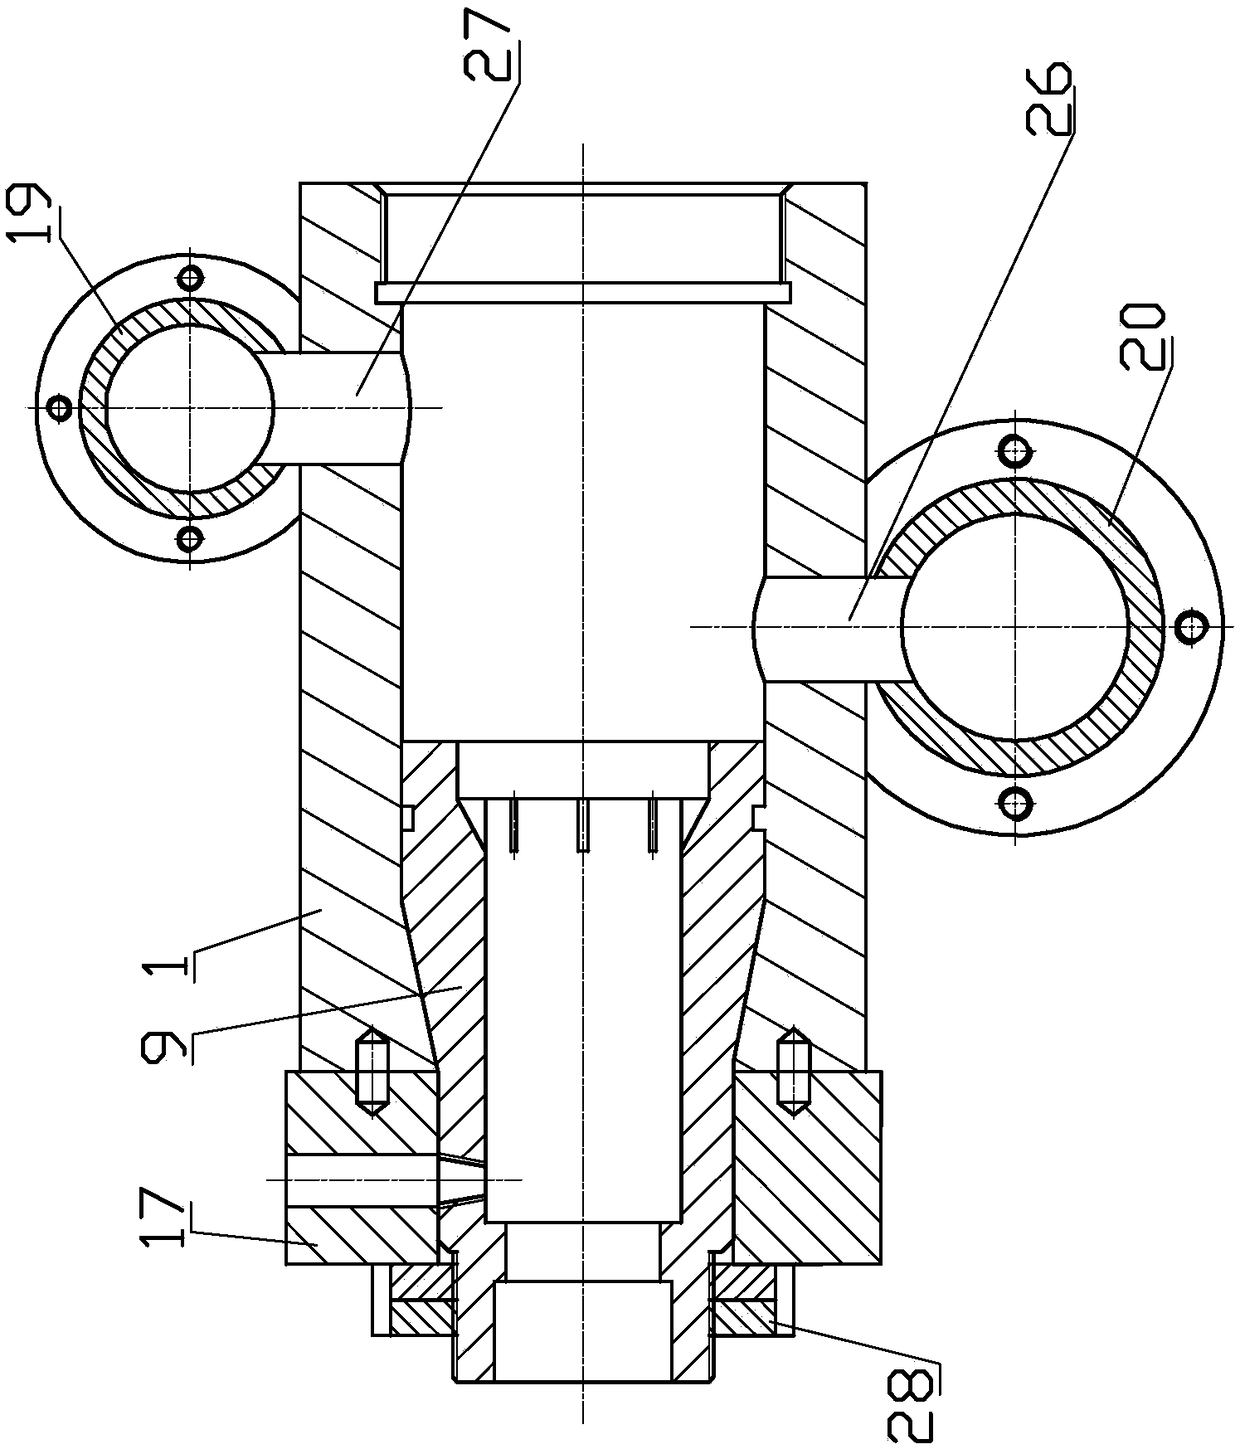 Fluid end of culvert body and pump body and machine body series combined structure